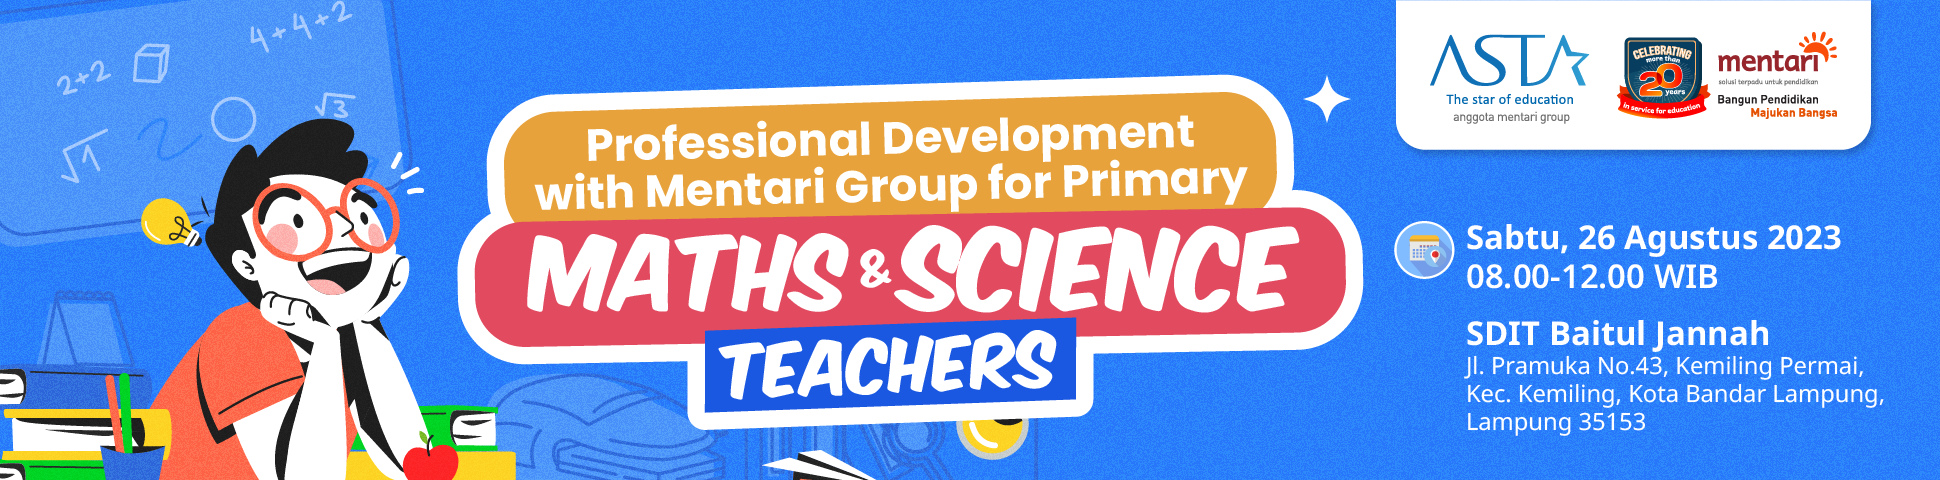 Professional Development Training for Primary Maths and Science Teachers - Lampung